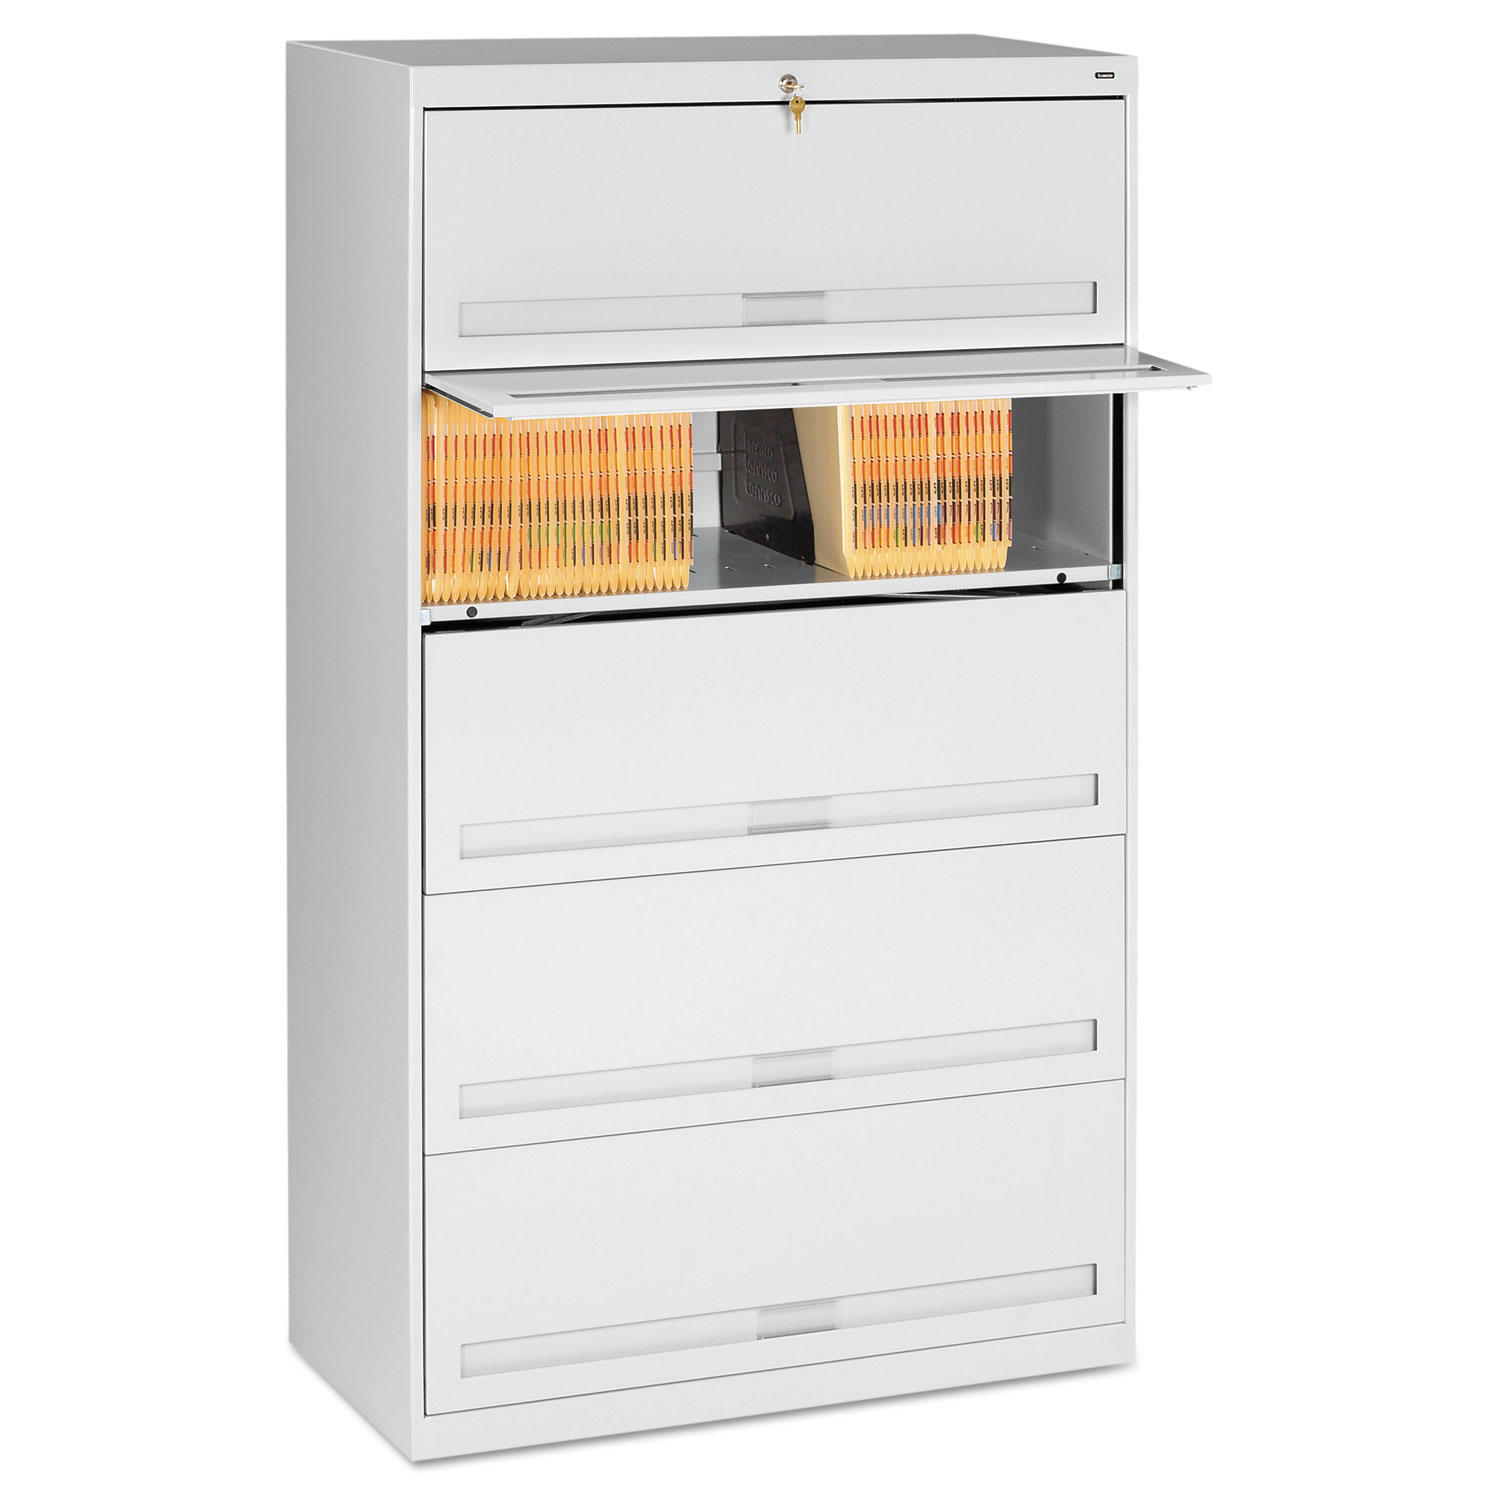 Closed Fixed 5-Shelf Lateral File, 36 x 16 1/2 x 63 1/2, Light Gray